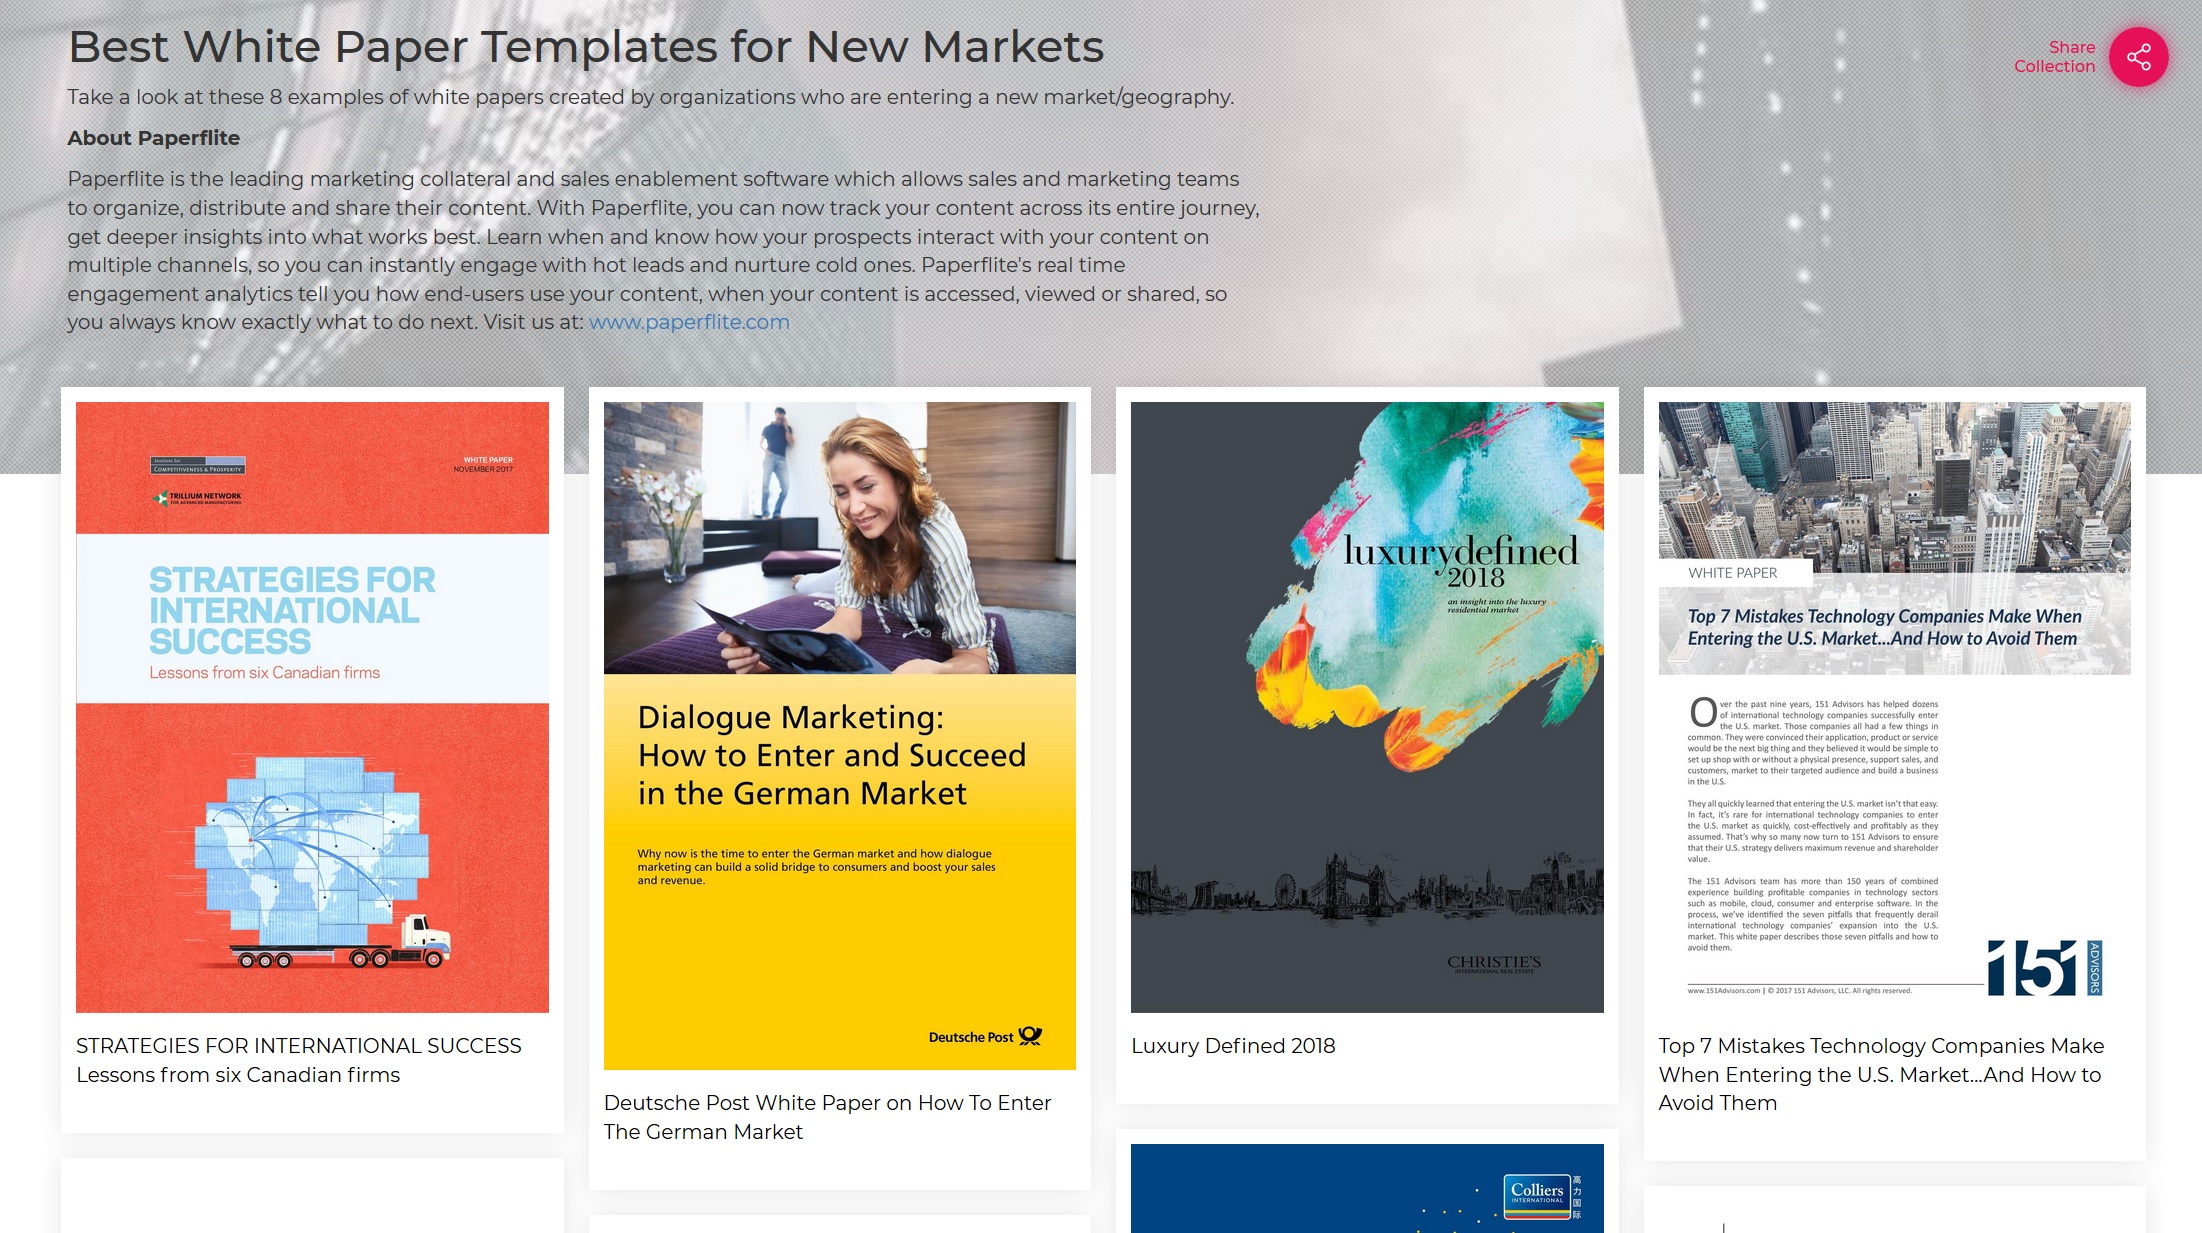 THE BEST WHITE PAPER EXAMPLES FOR NEW MARKETS